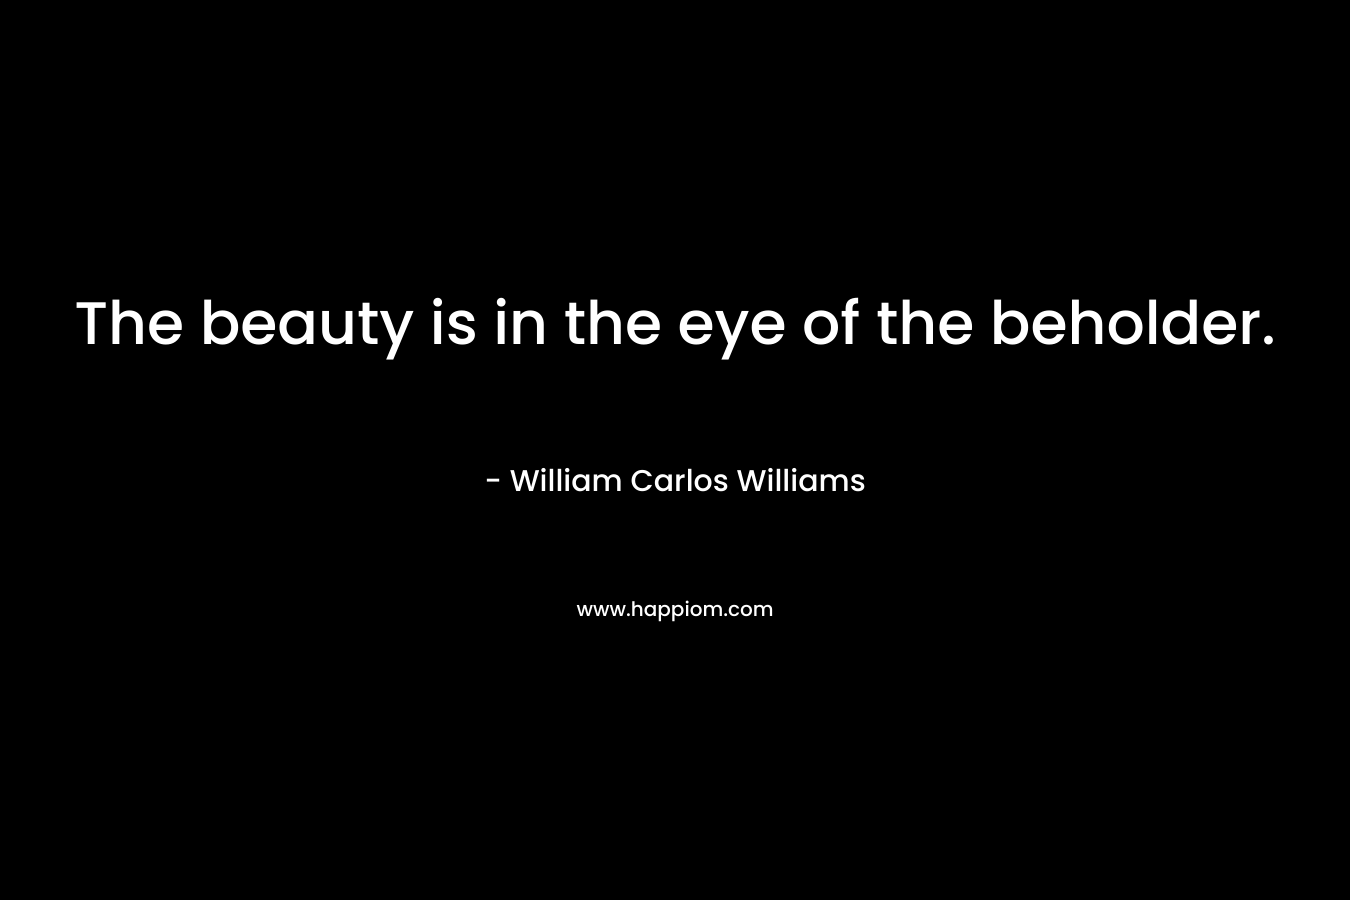 The beauty is in the eye of the beholder. – William Carlos Williams